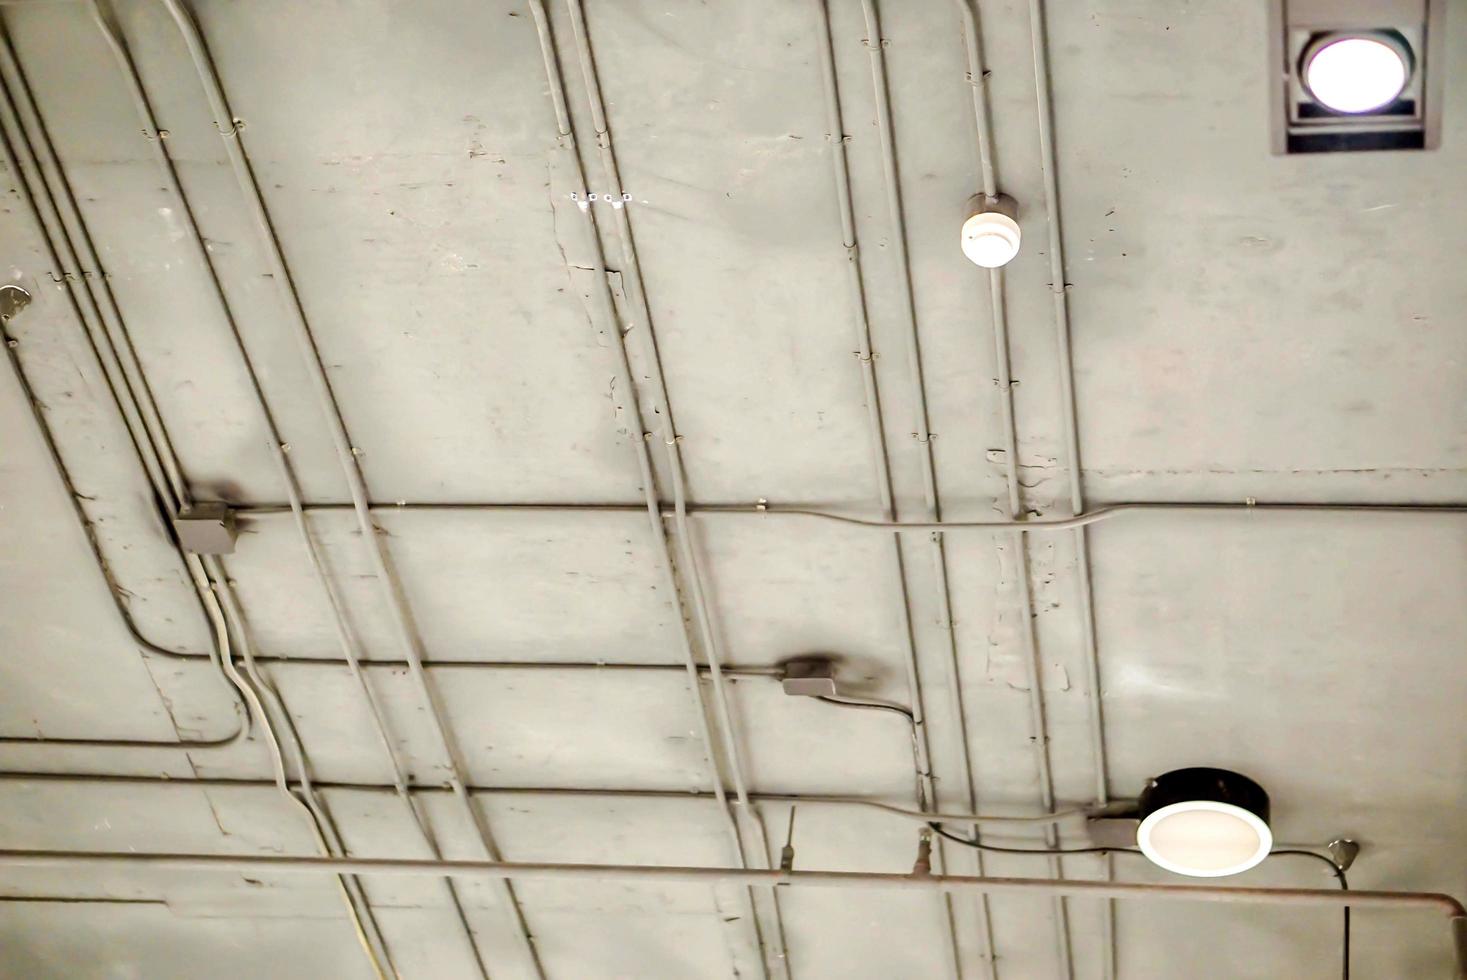 Design and Structure of pipe electric wire in buildings ceiling. photo